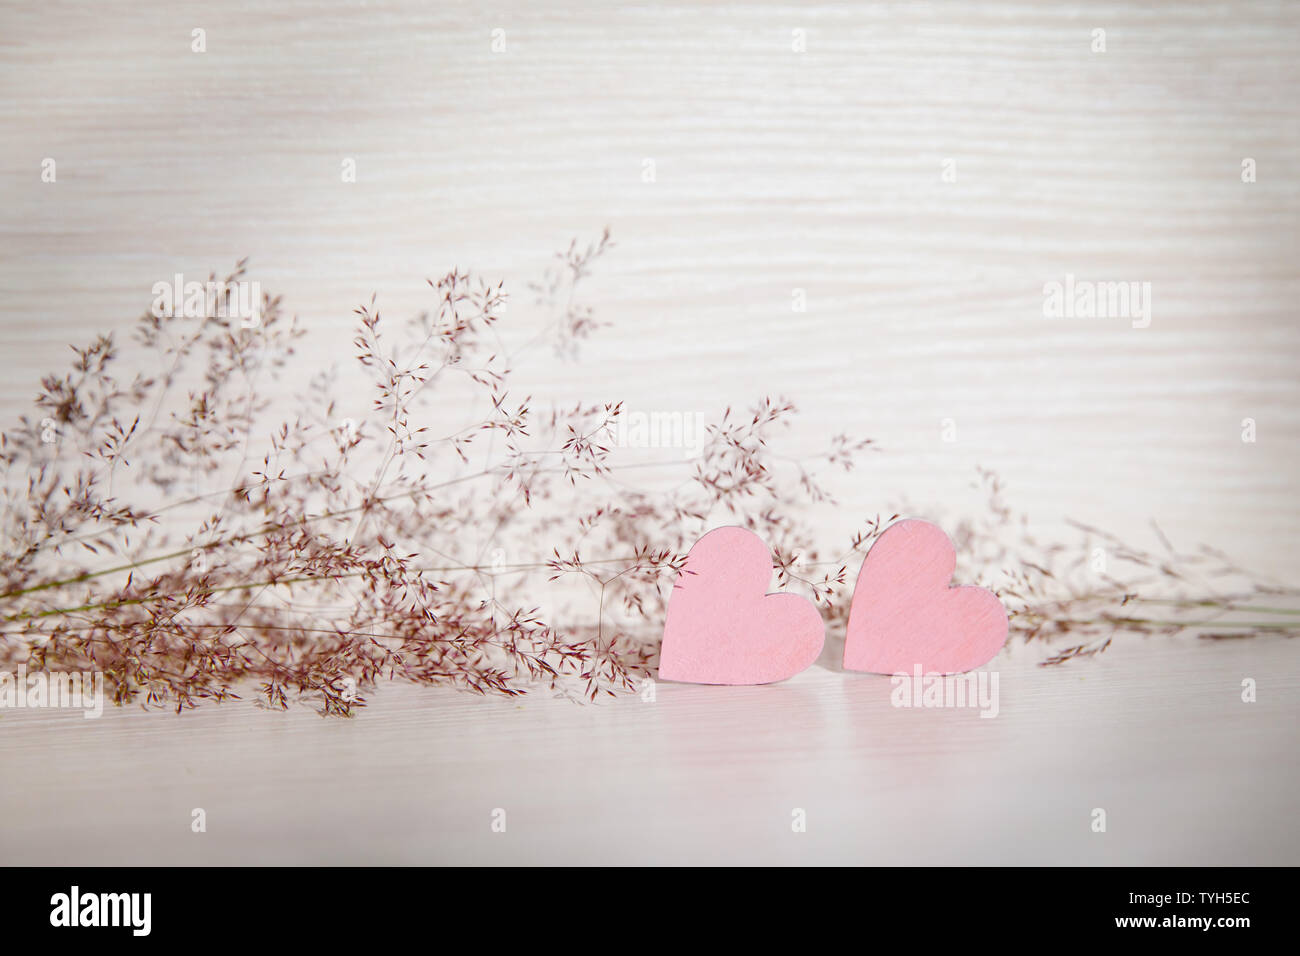 Two hearts, background for greetings on Valentine's Day. Wooden hearts and herbs on a beautiful background. Pink hearts. Stock Photo